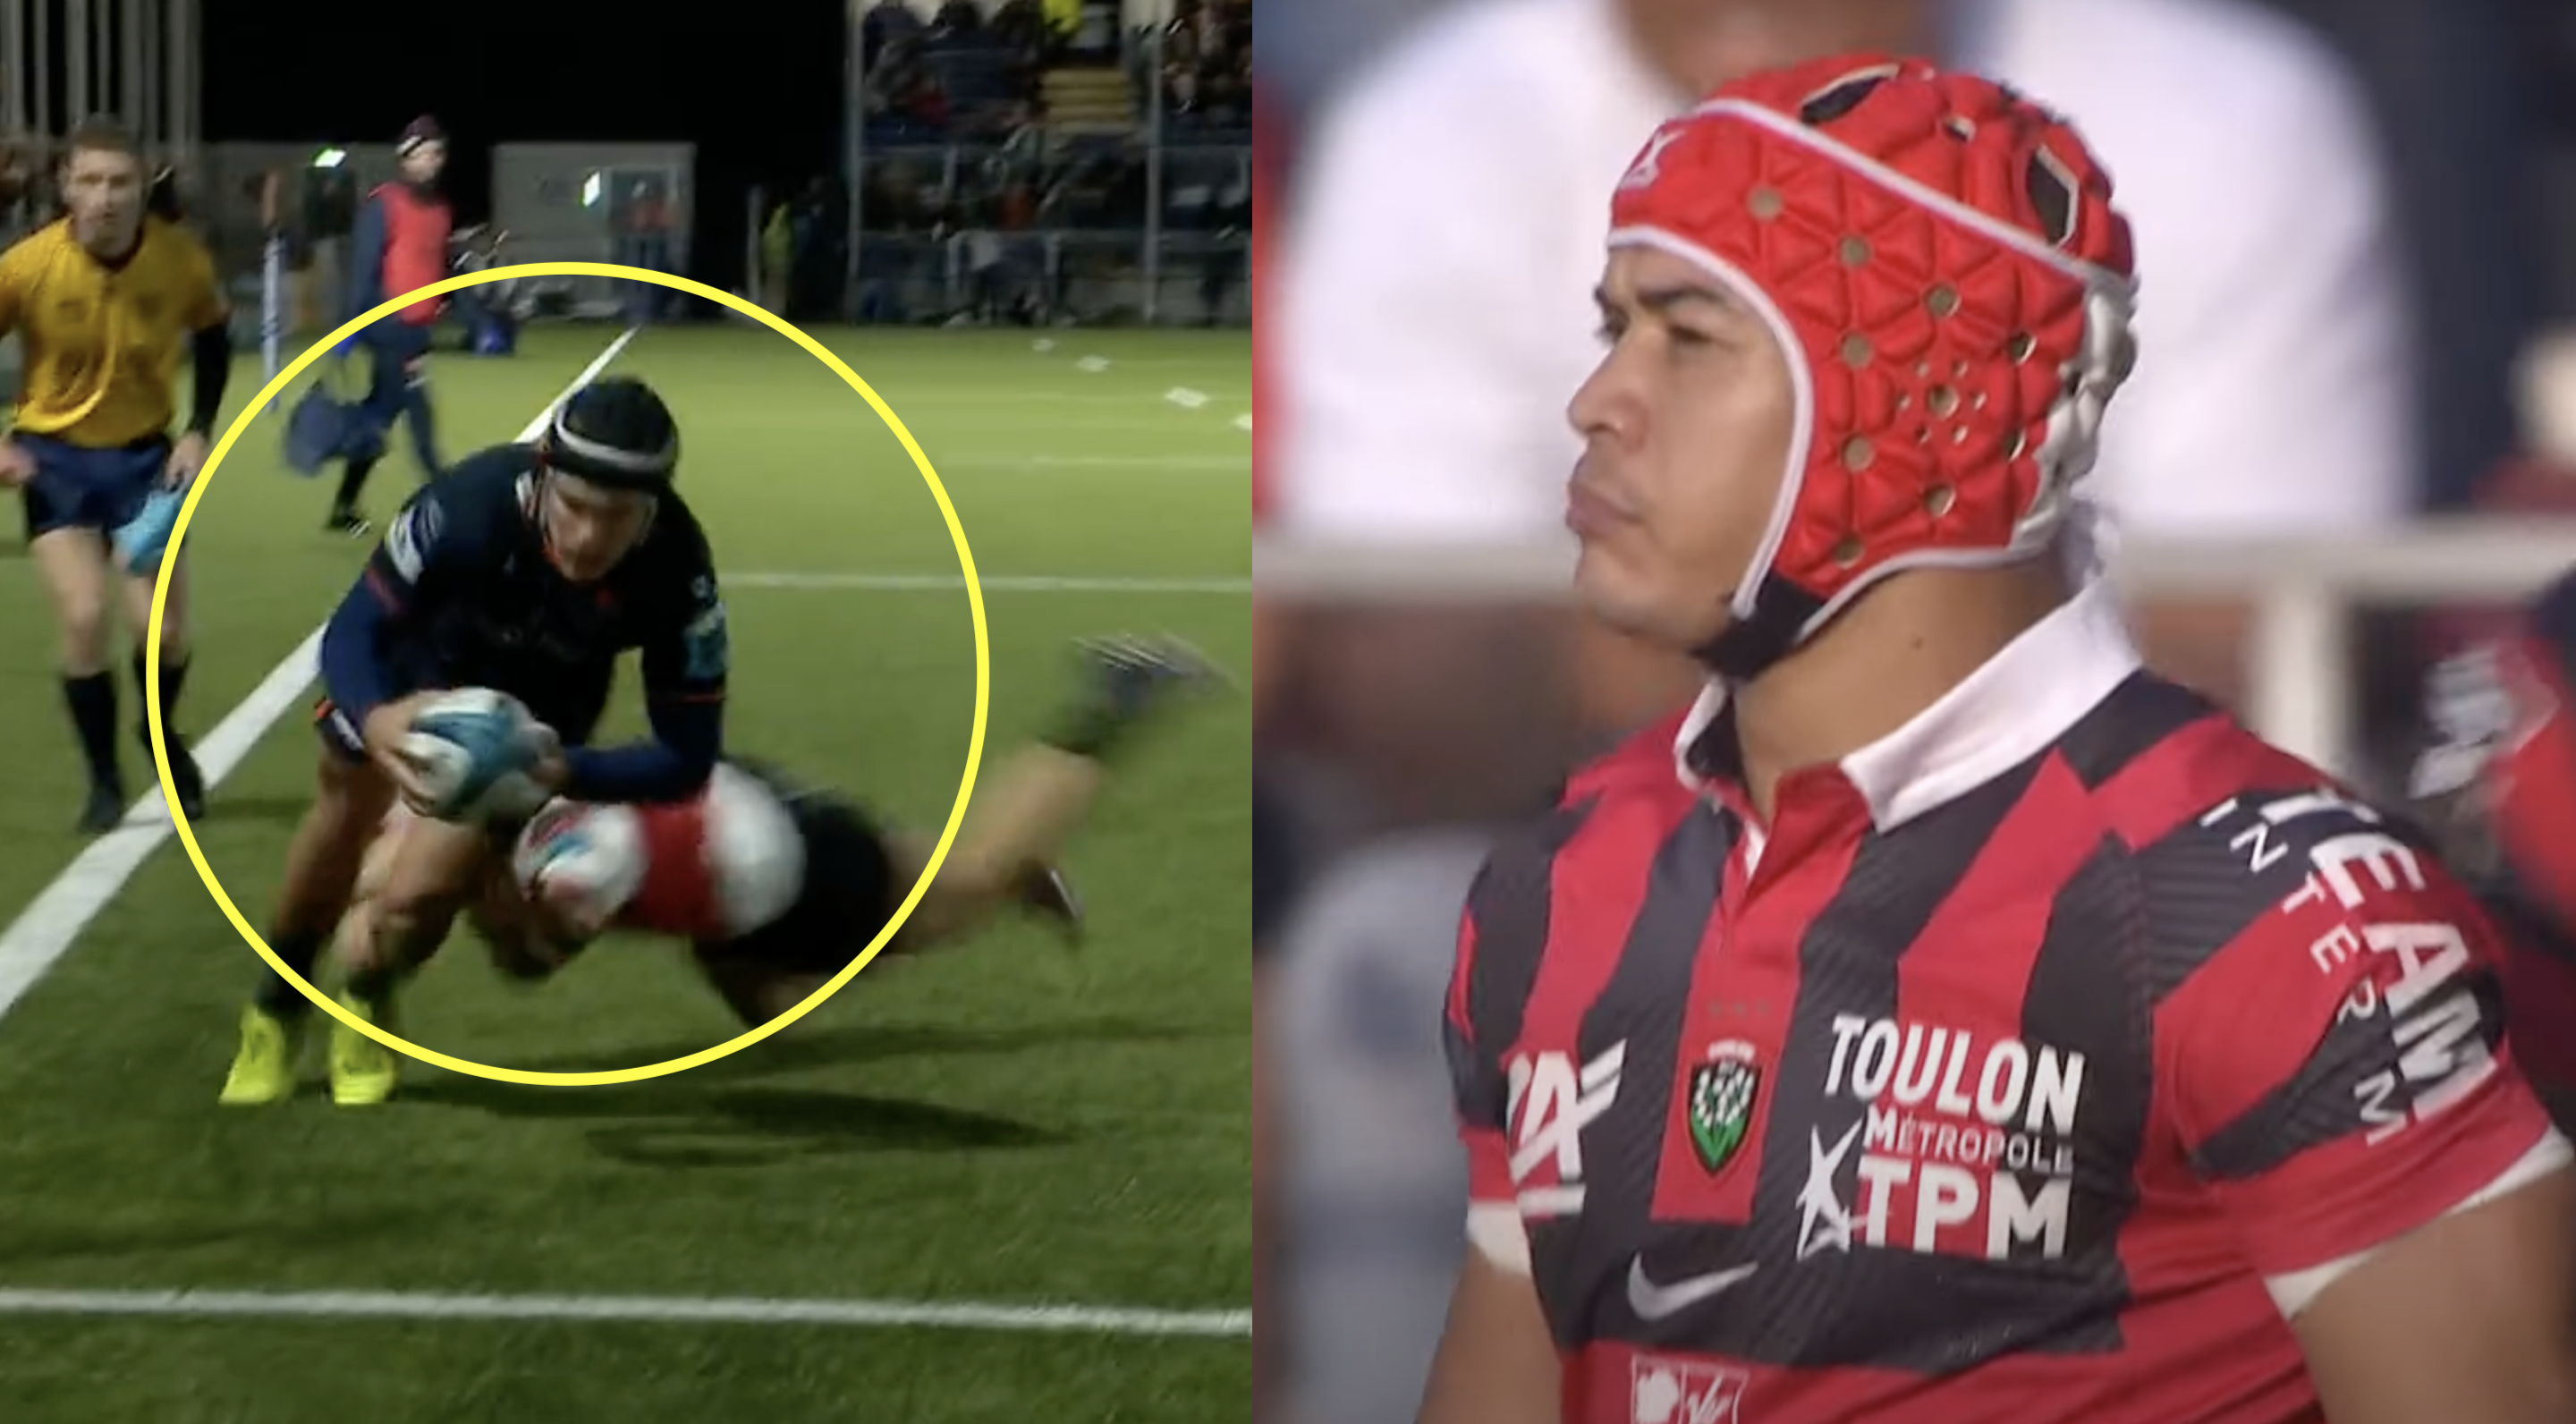 Cheslin Kolbe scores the exact same try as his idol Darcy Graham